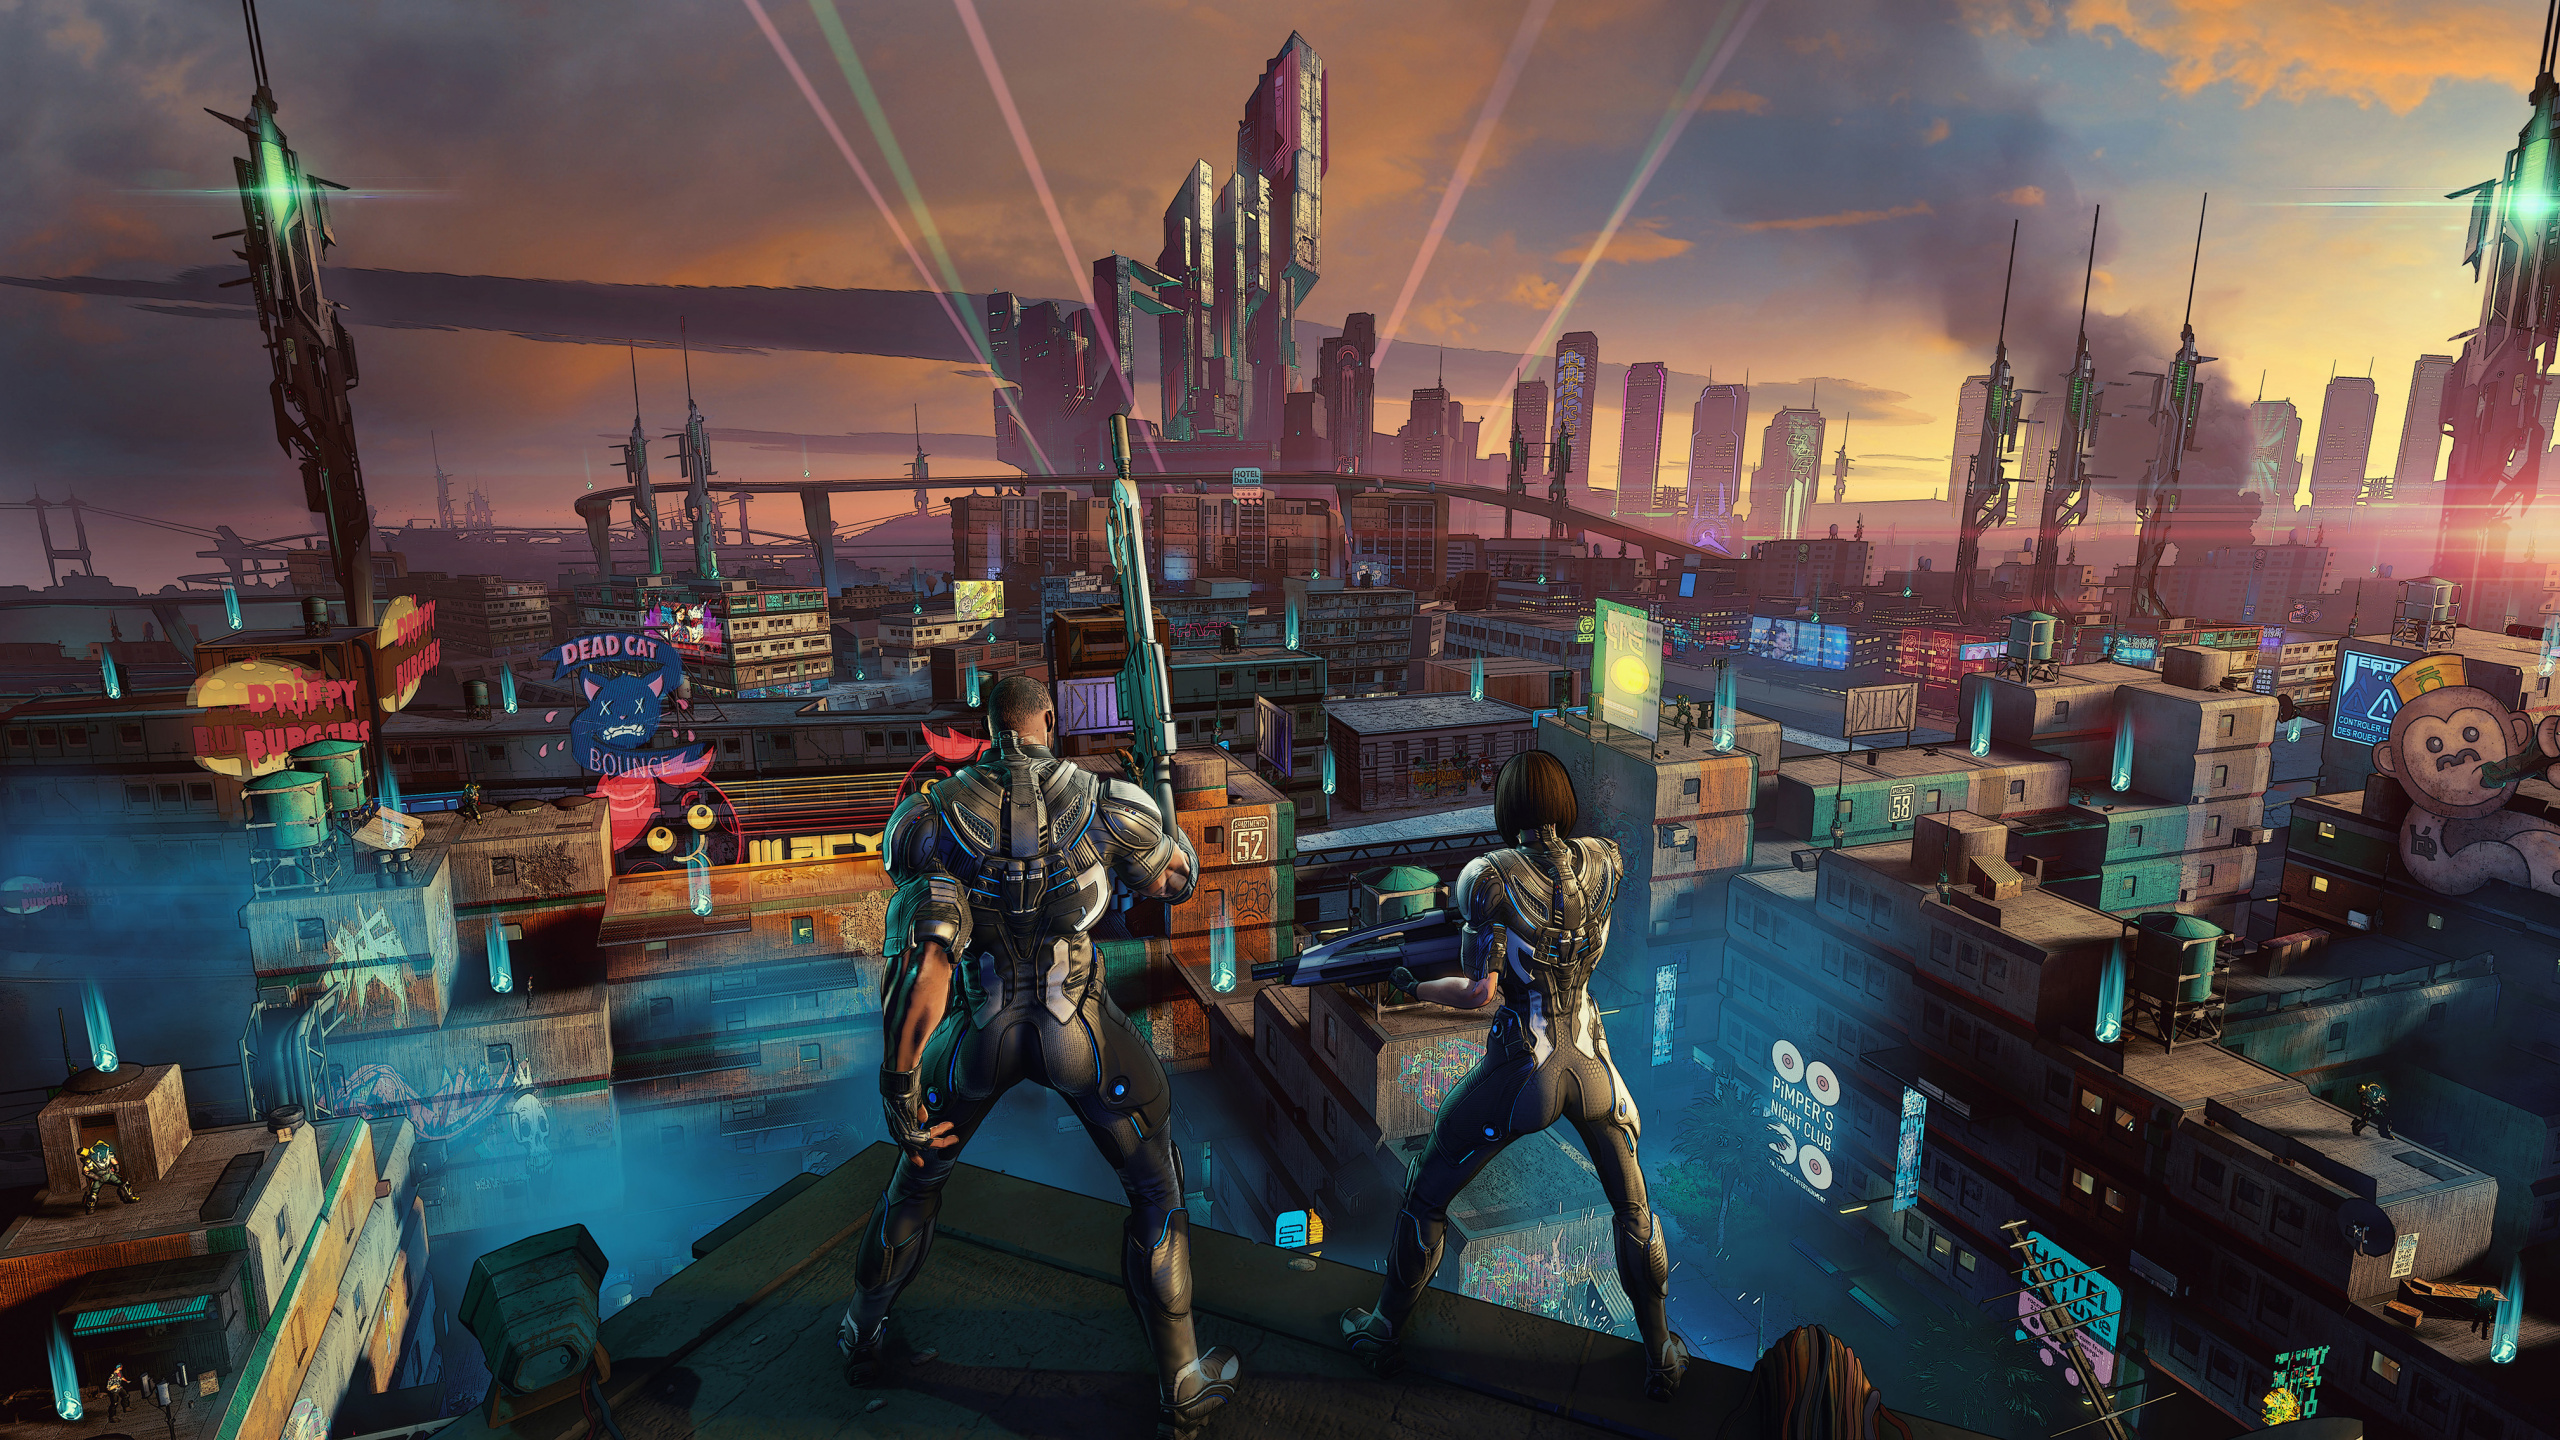 Crackdown 3, Xbox Game Studios, pc Game, Games, Strategy Video Game. Wallpaper in 2560x1440 Resolution